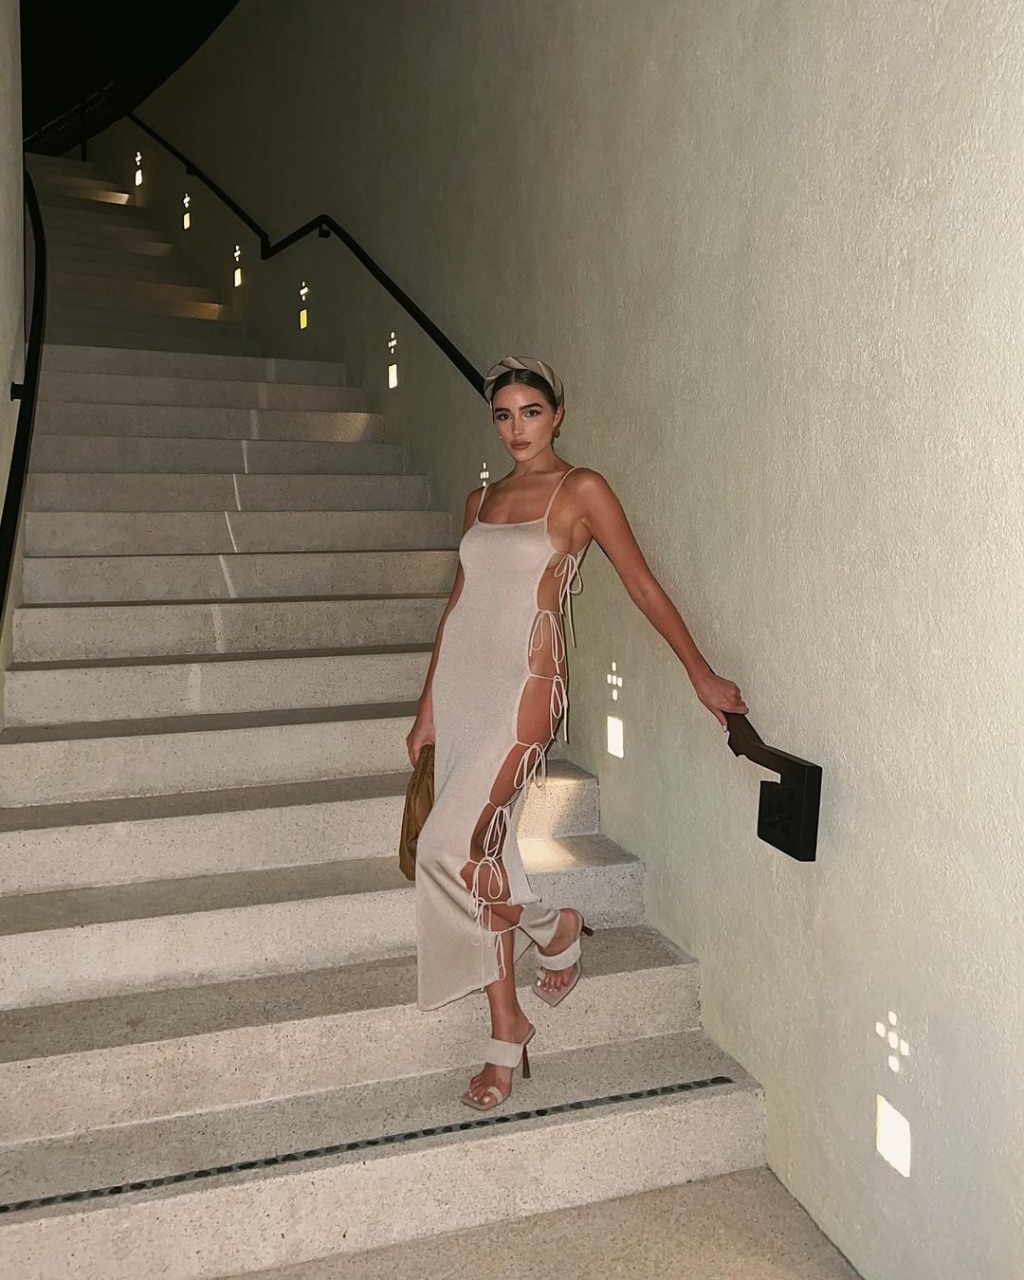 Olivia Frances Culpo Latest Mexico Vacation Images Goes Viral on Social Media